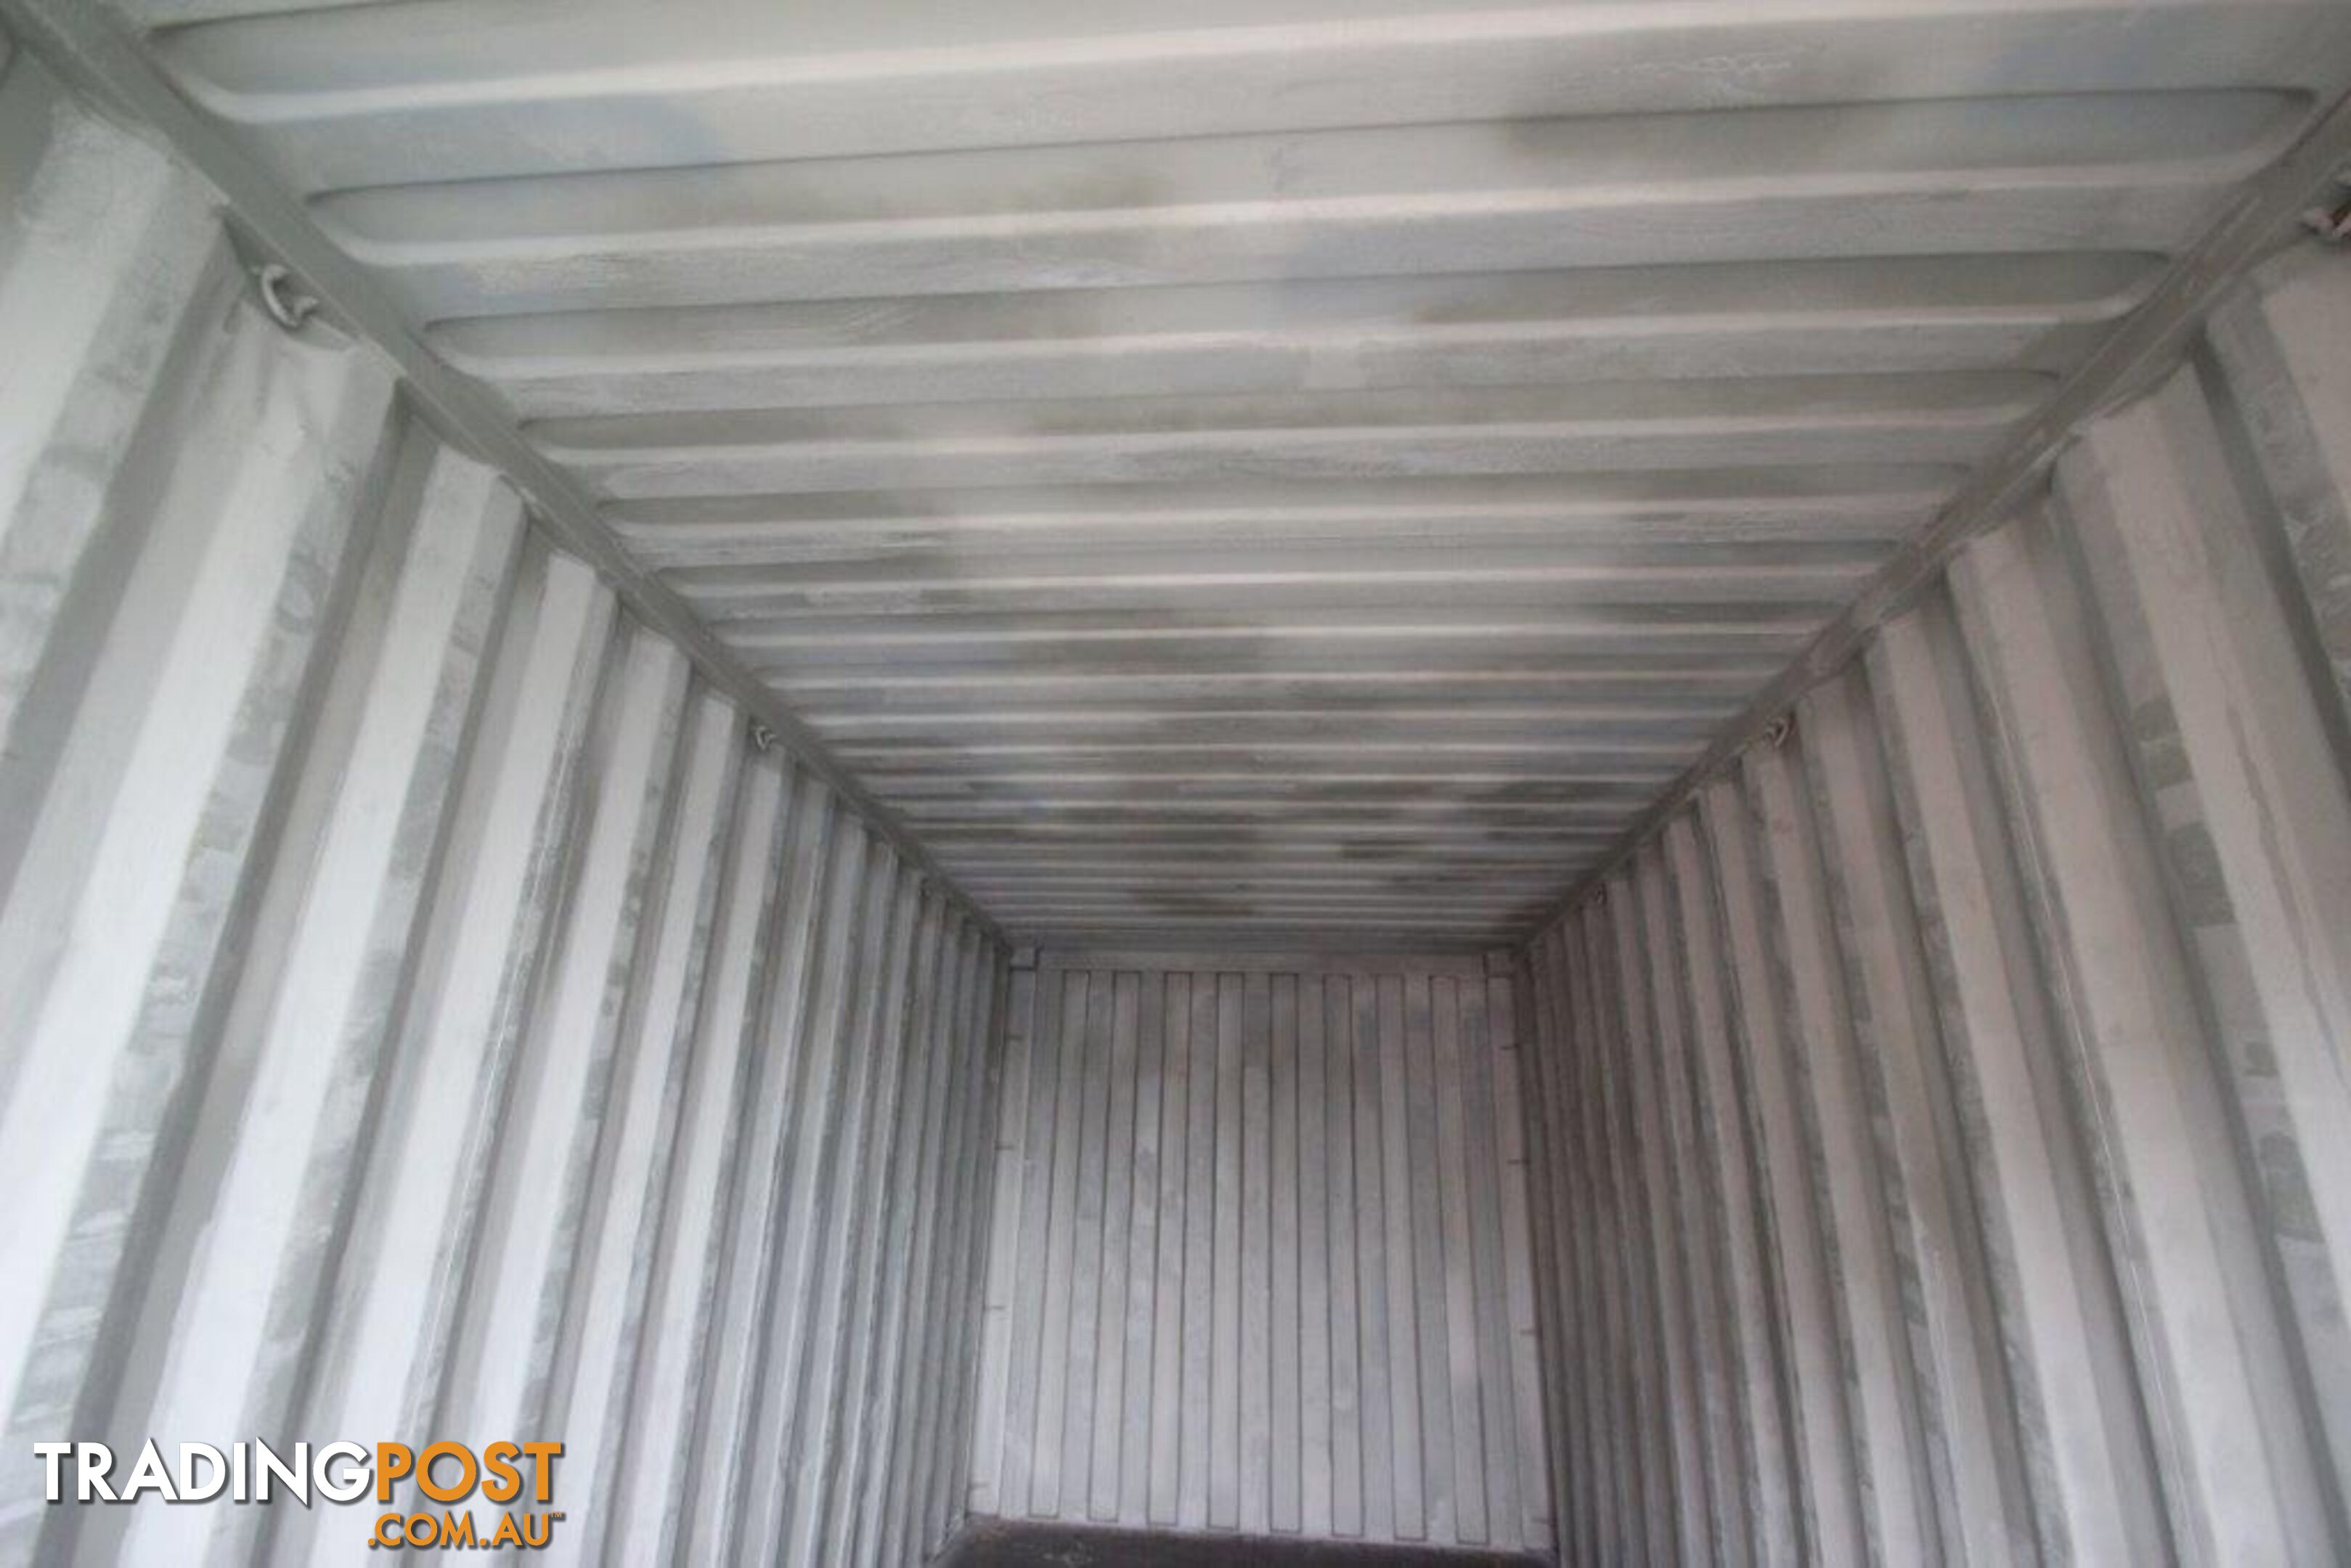 Used 20ft Shipping Containers Rockhampton - From $2900 + GST